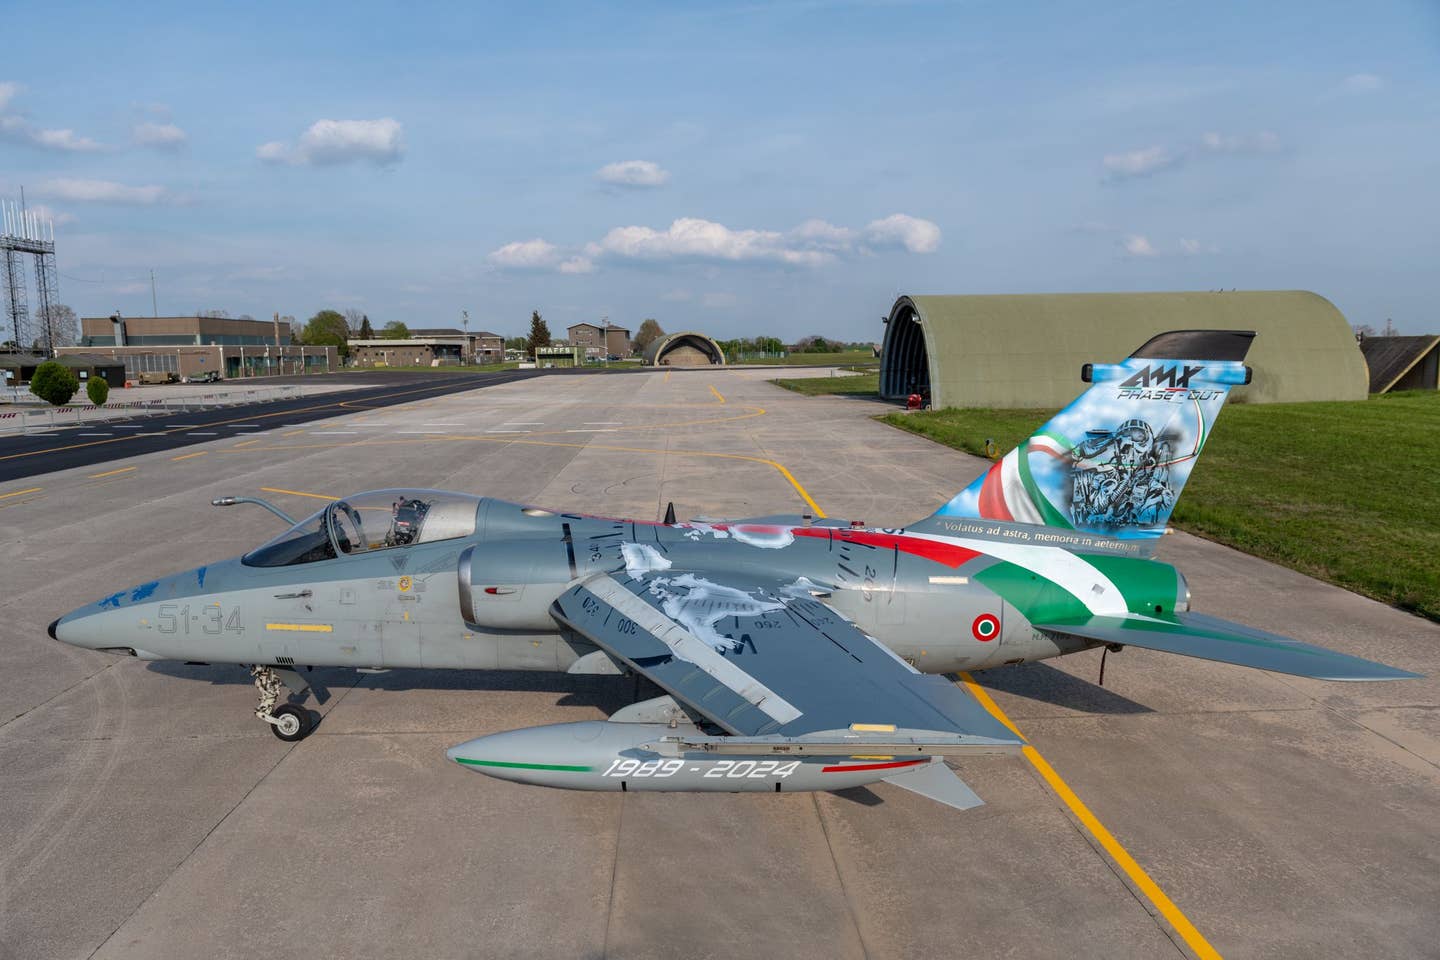 An AMX of the&nbsp;132° Gruppo/51º Stormo specially painted in the retirement scheme for the type. <em>Italian Air Force</em>